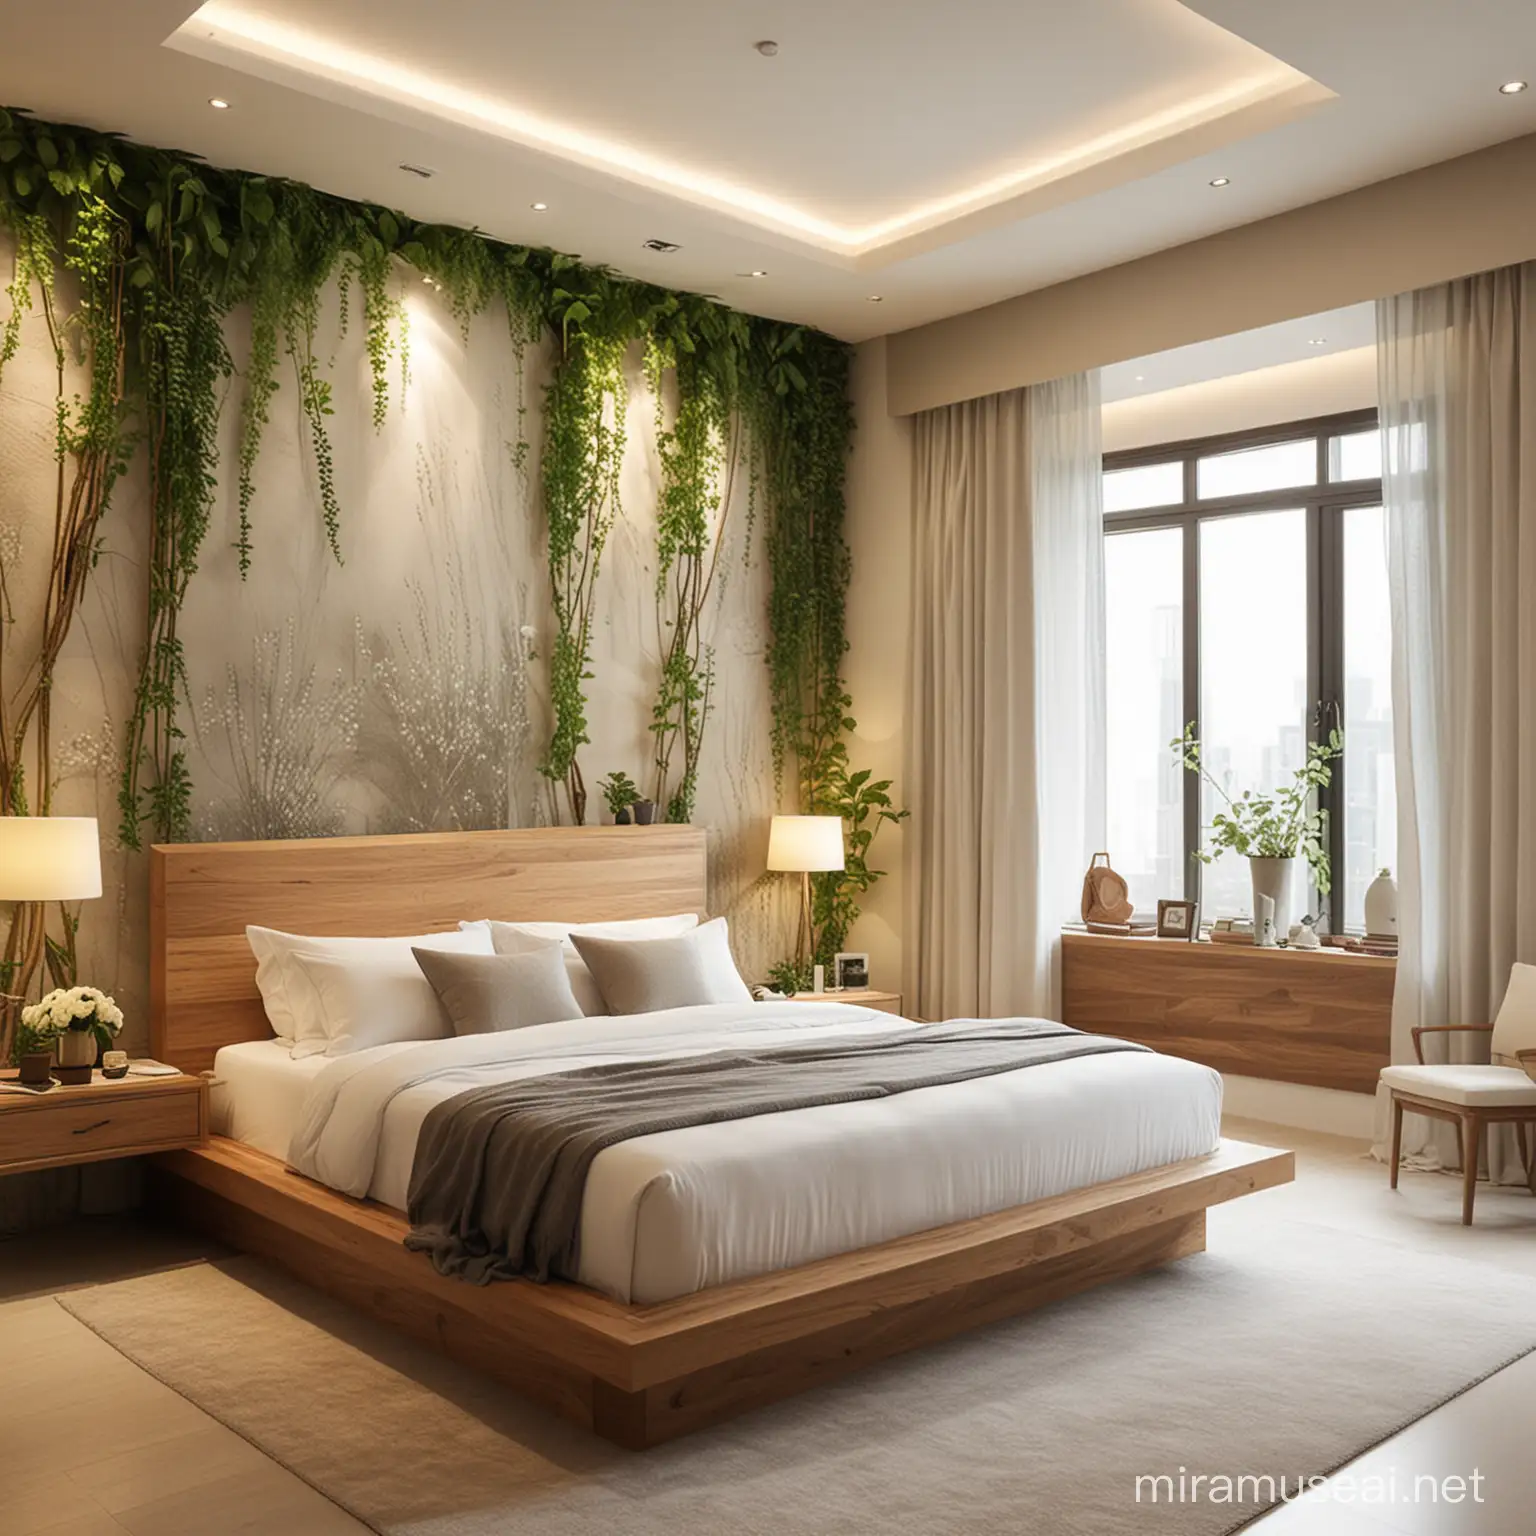 Tranquil Bedroom Retreat Natural Sanctuary Themed Decor